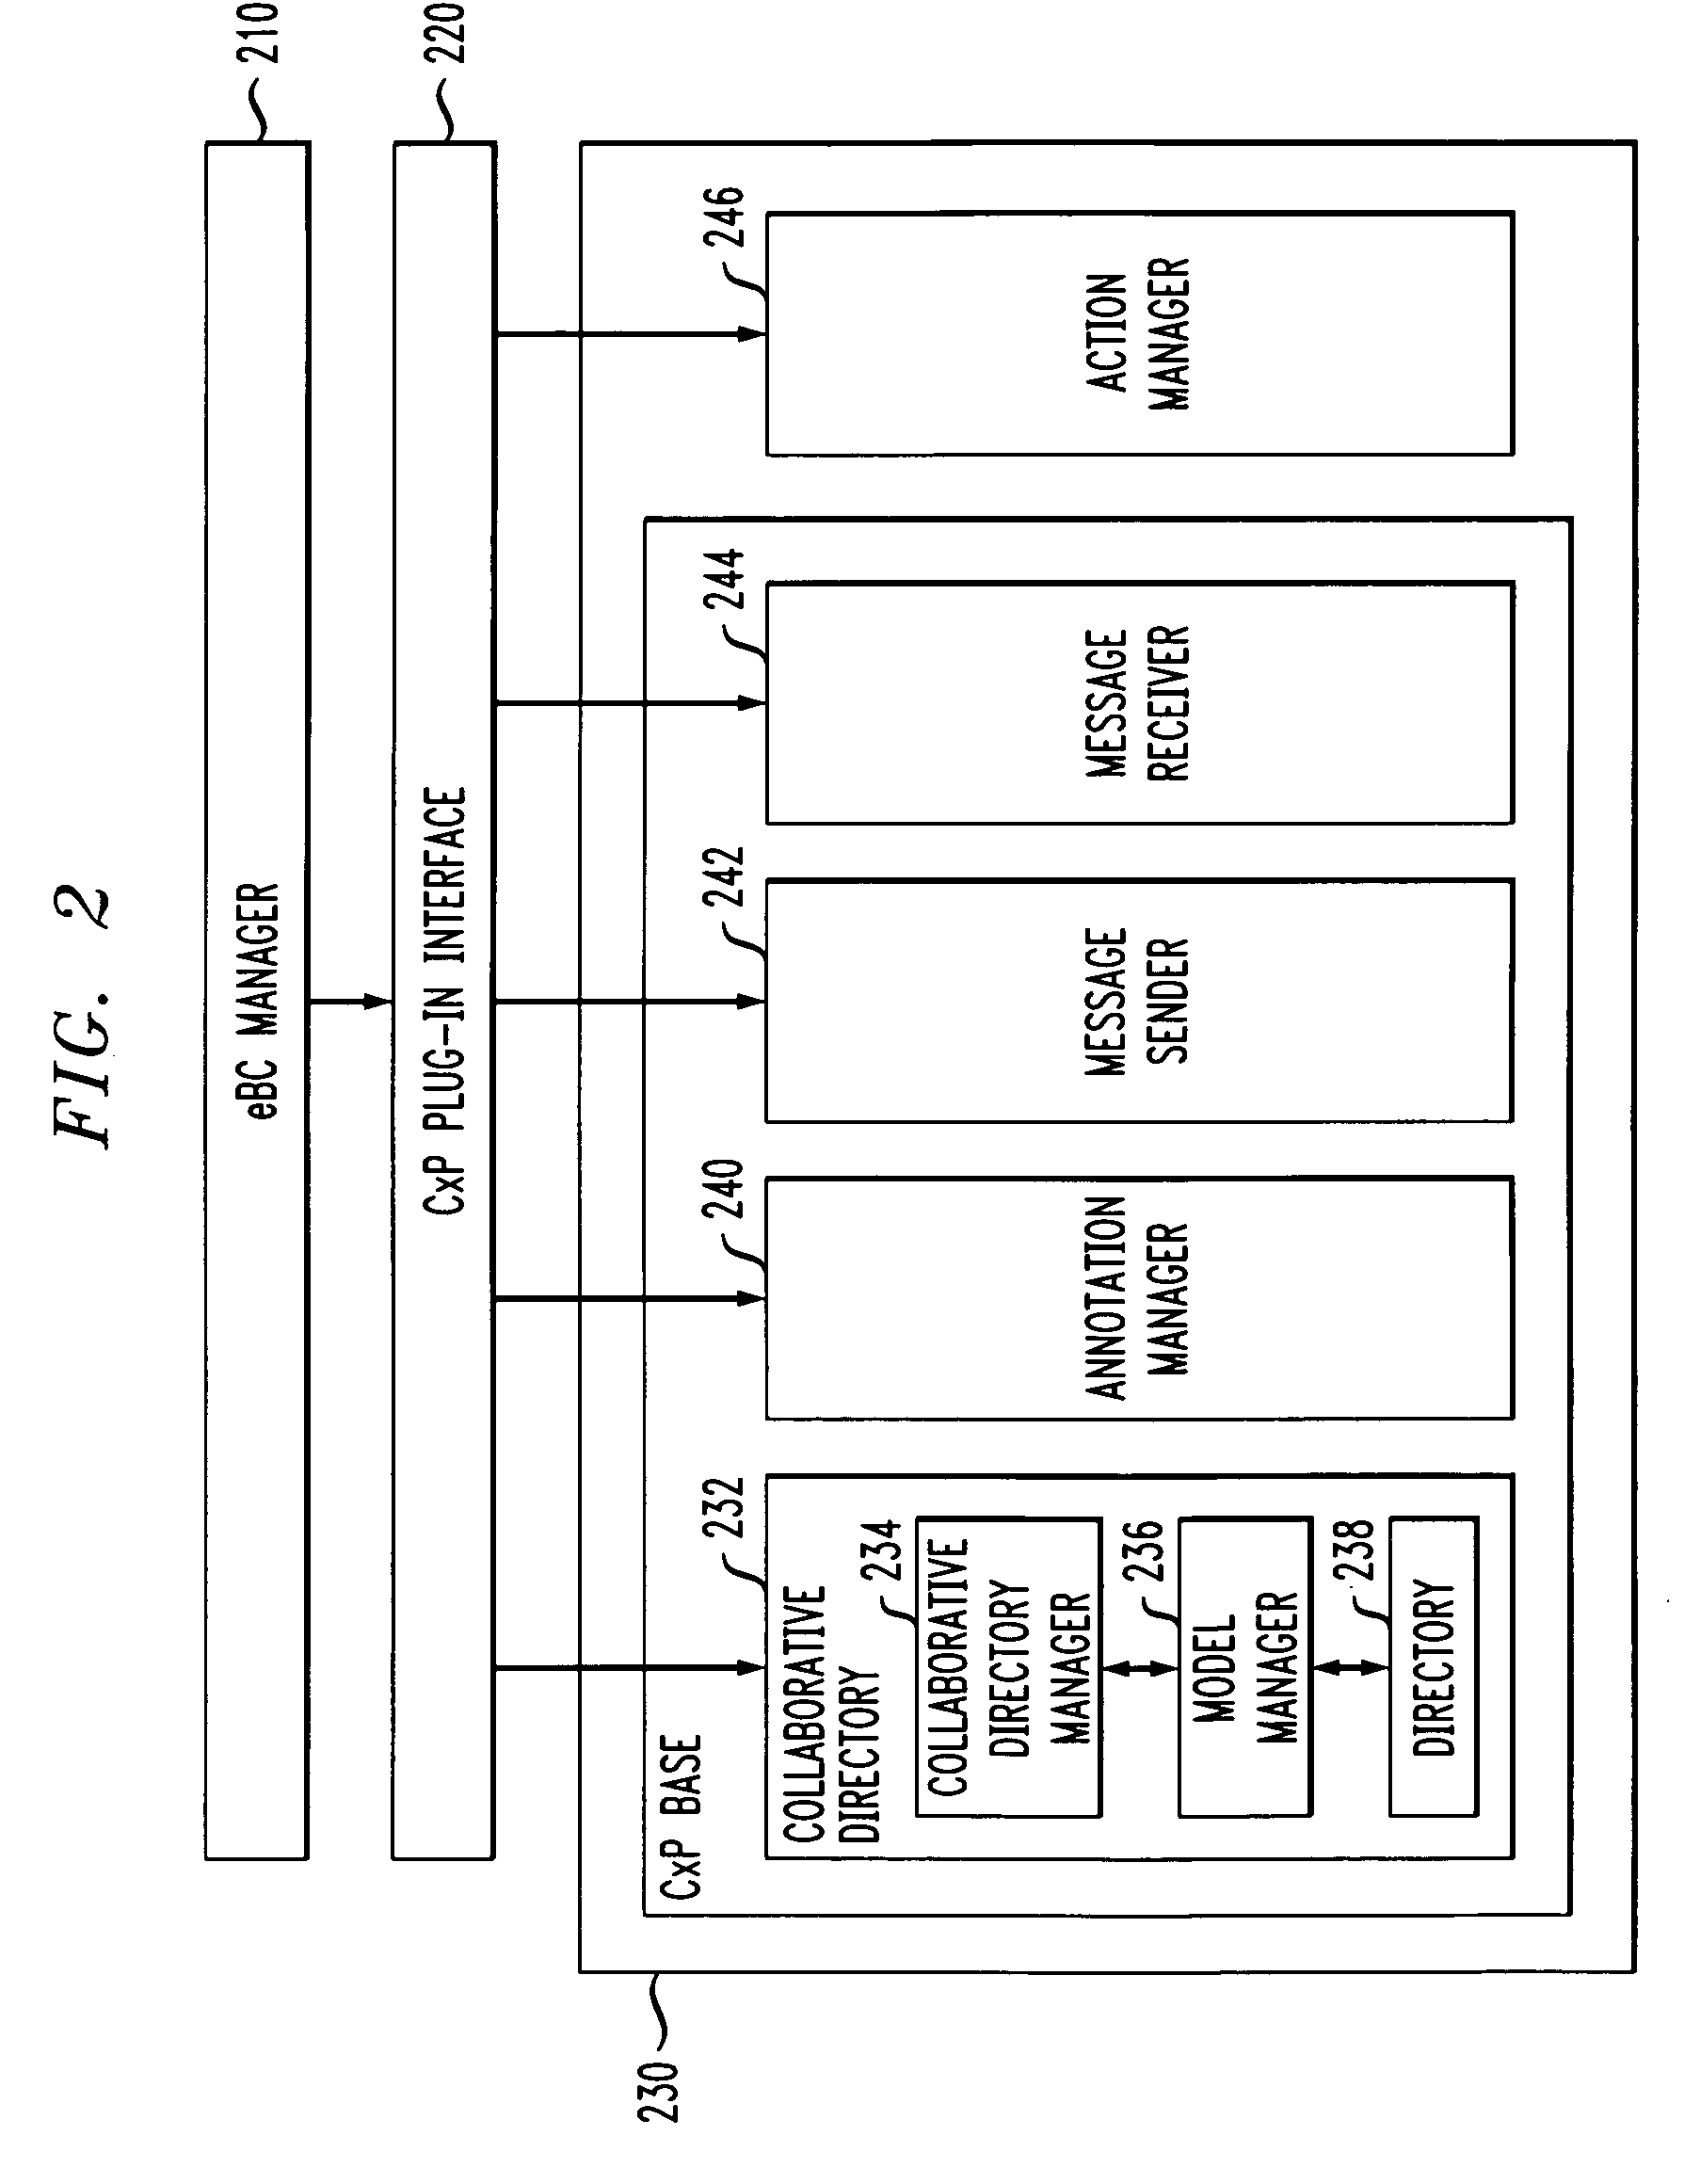 Method and apparatus for creating and customizing plug-in business collaboration protocols